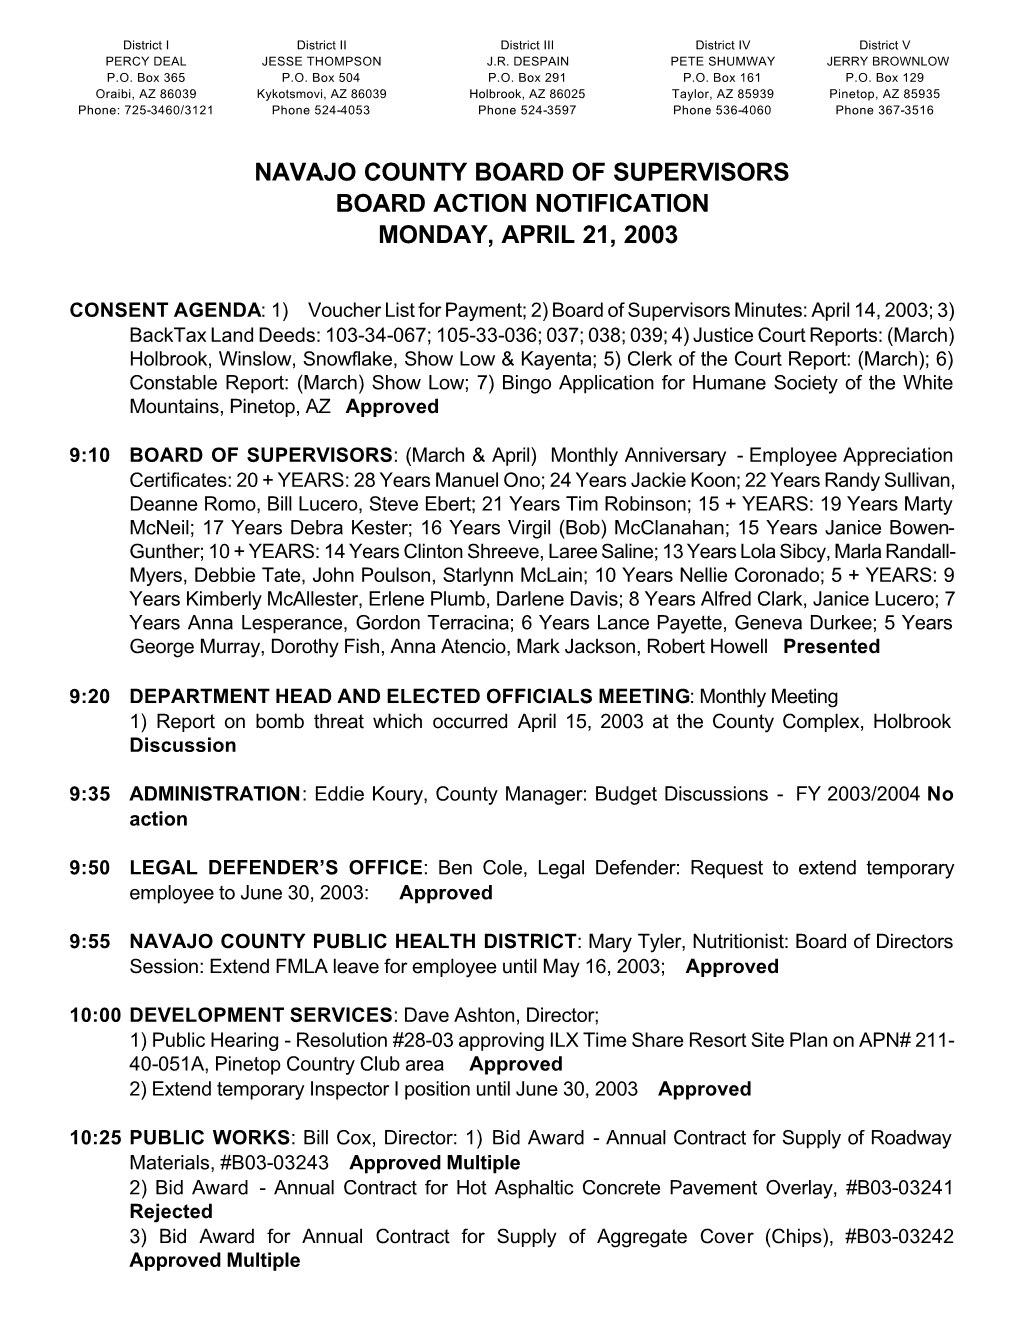 Board of Supervisors Board Action Notification Monday, April 21, 2003